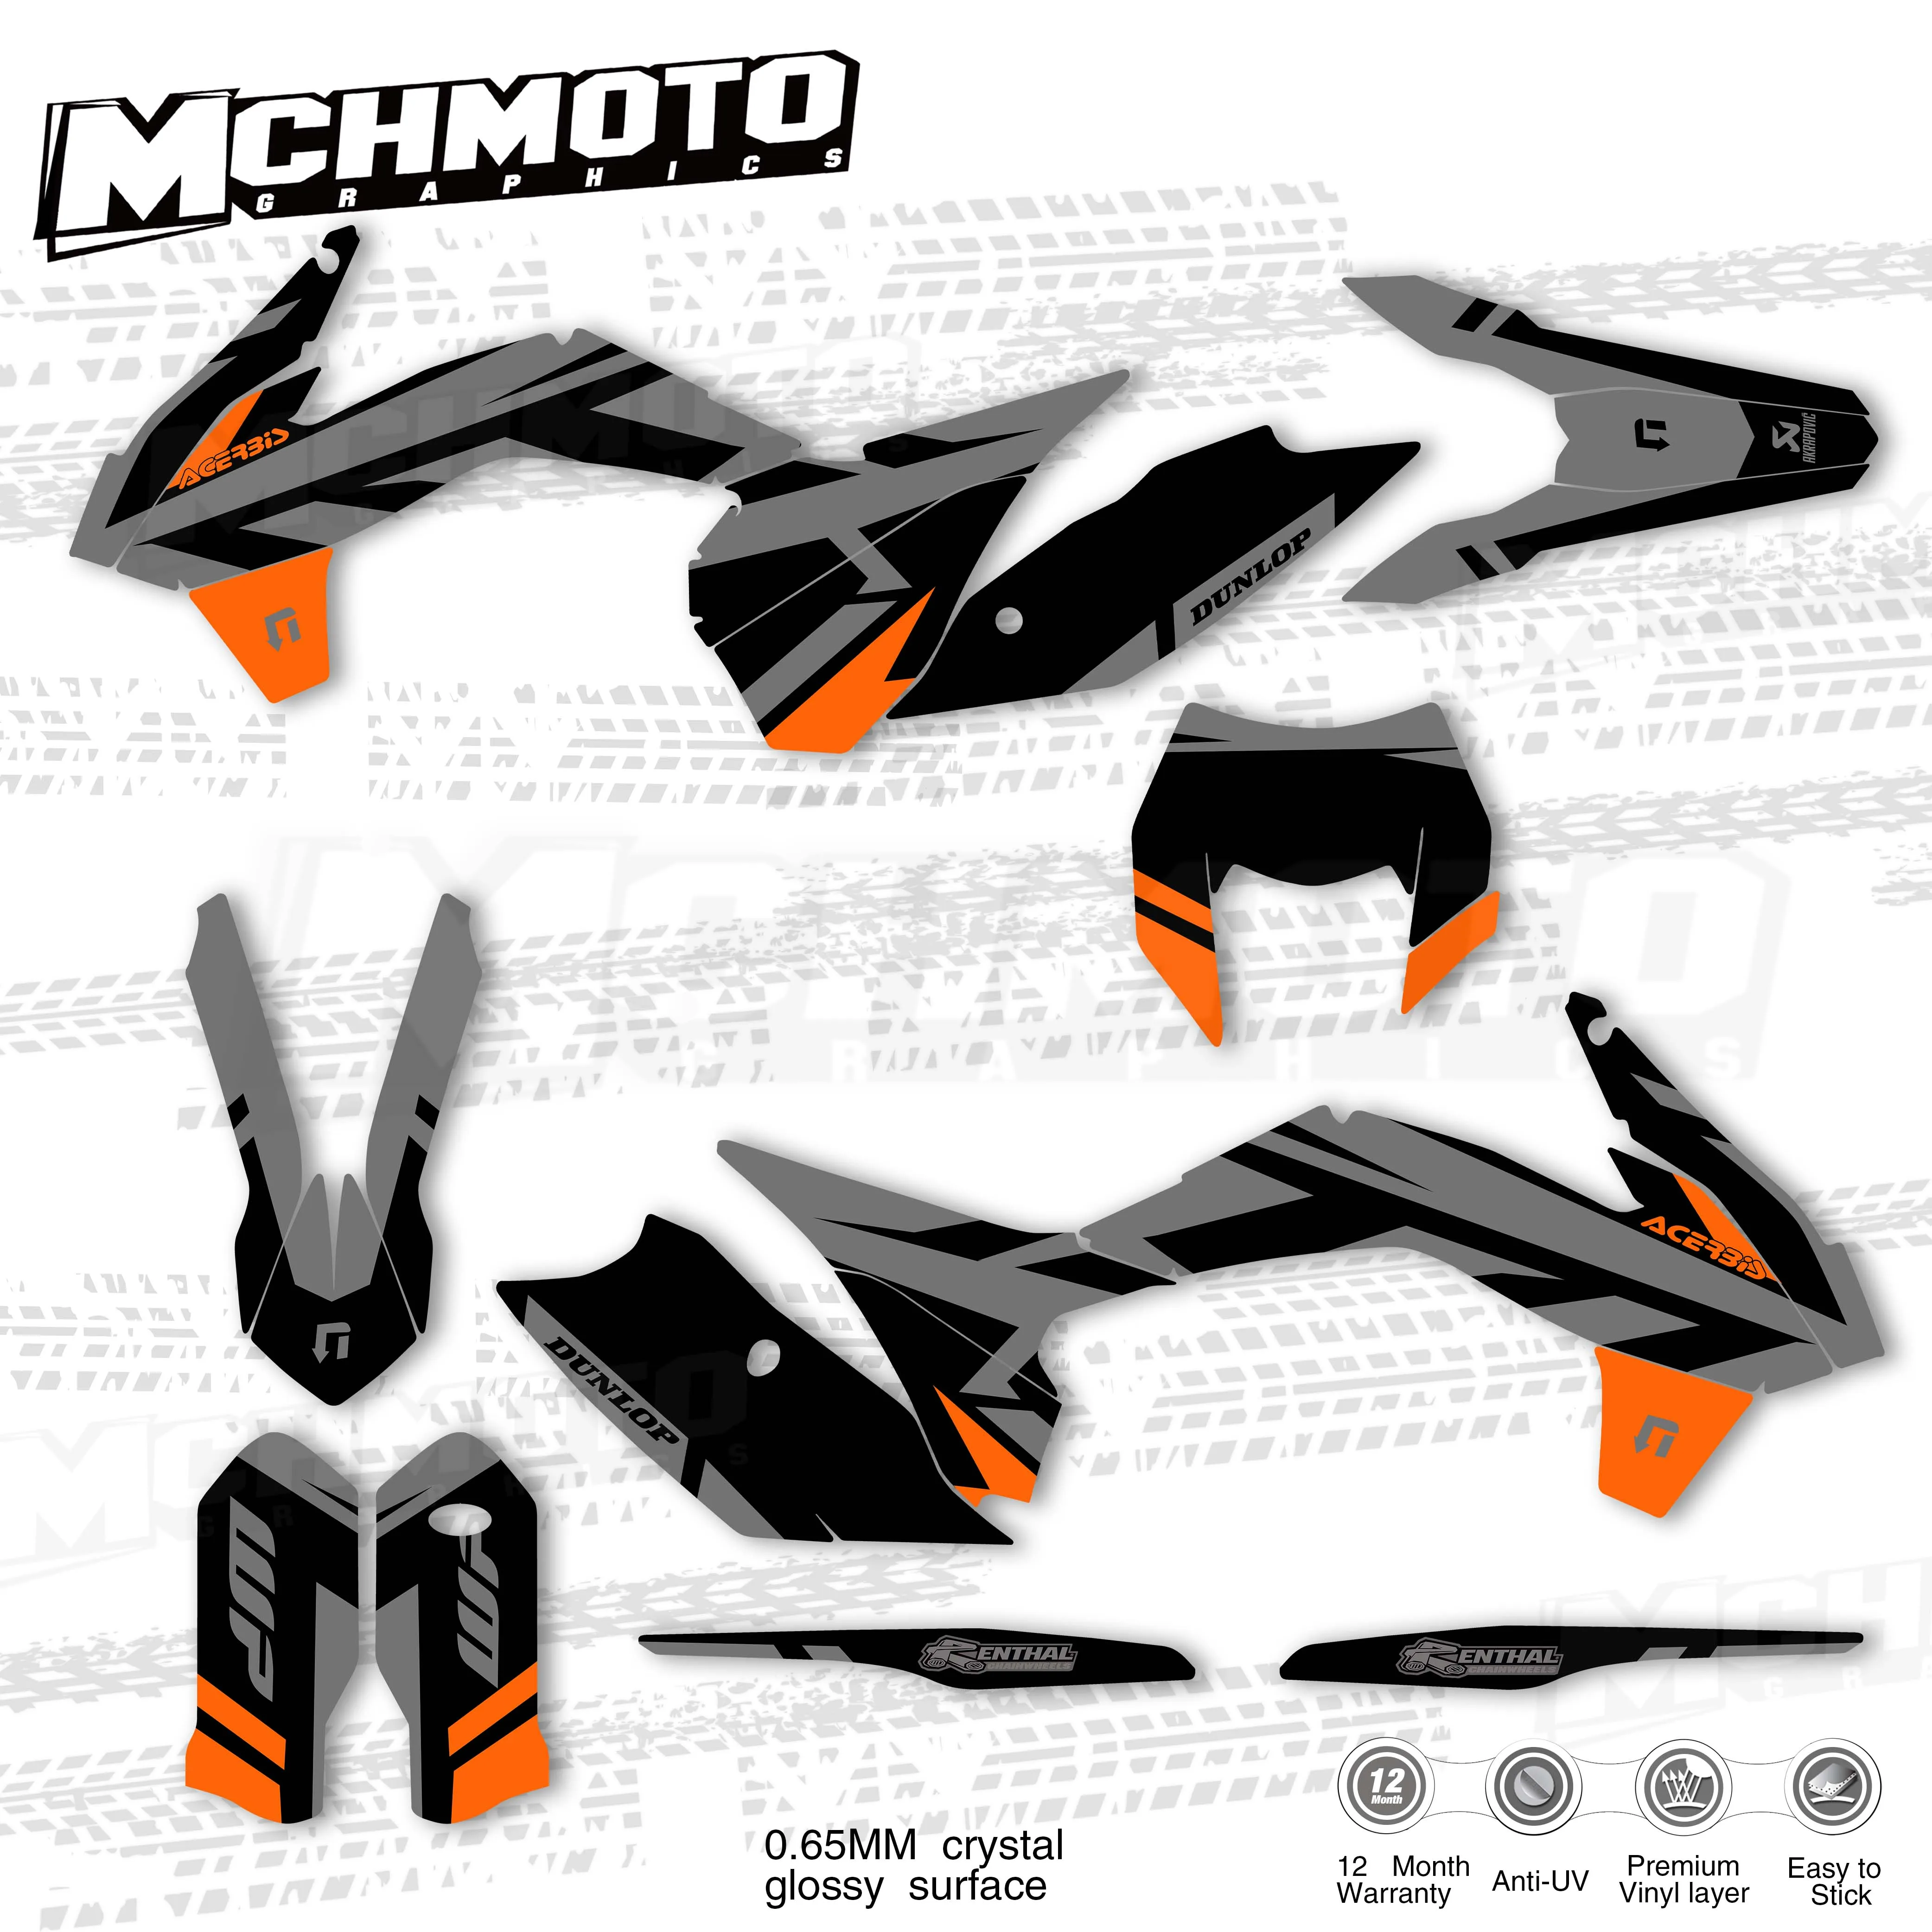 MCHMFGFull Graphics Decals Stickers Motorcycle Background Custom Number Name For KTM EXC EXC-F 125 250 300 350 450 2014 2015 201